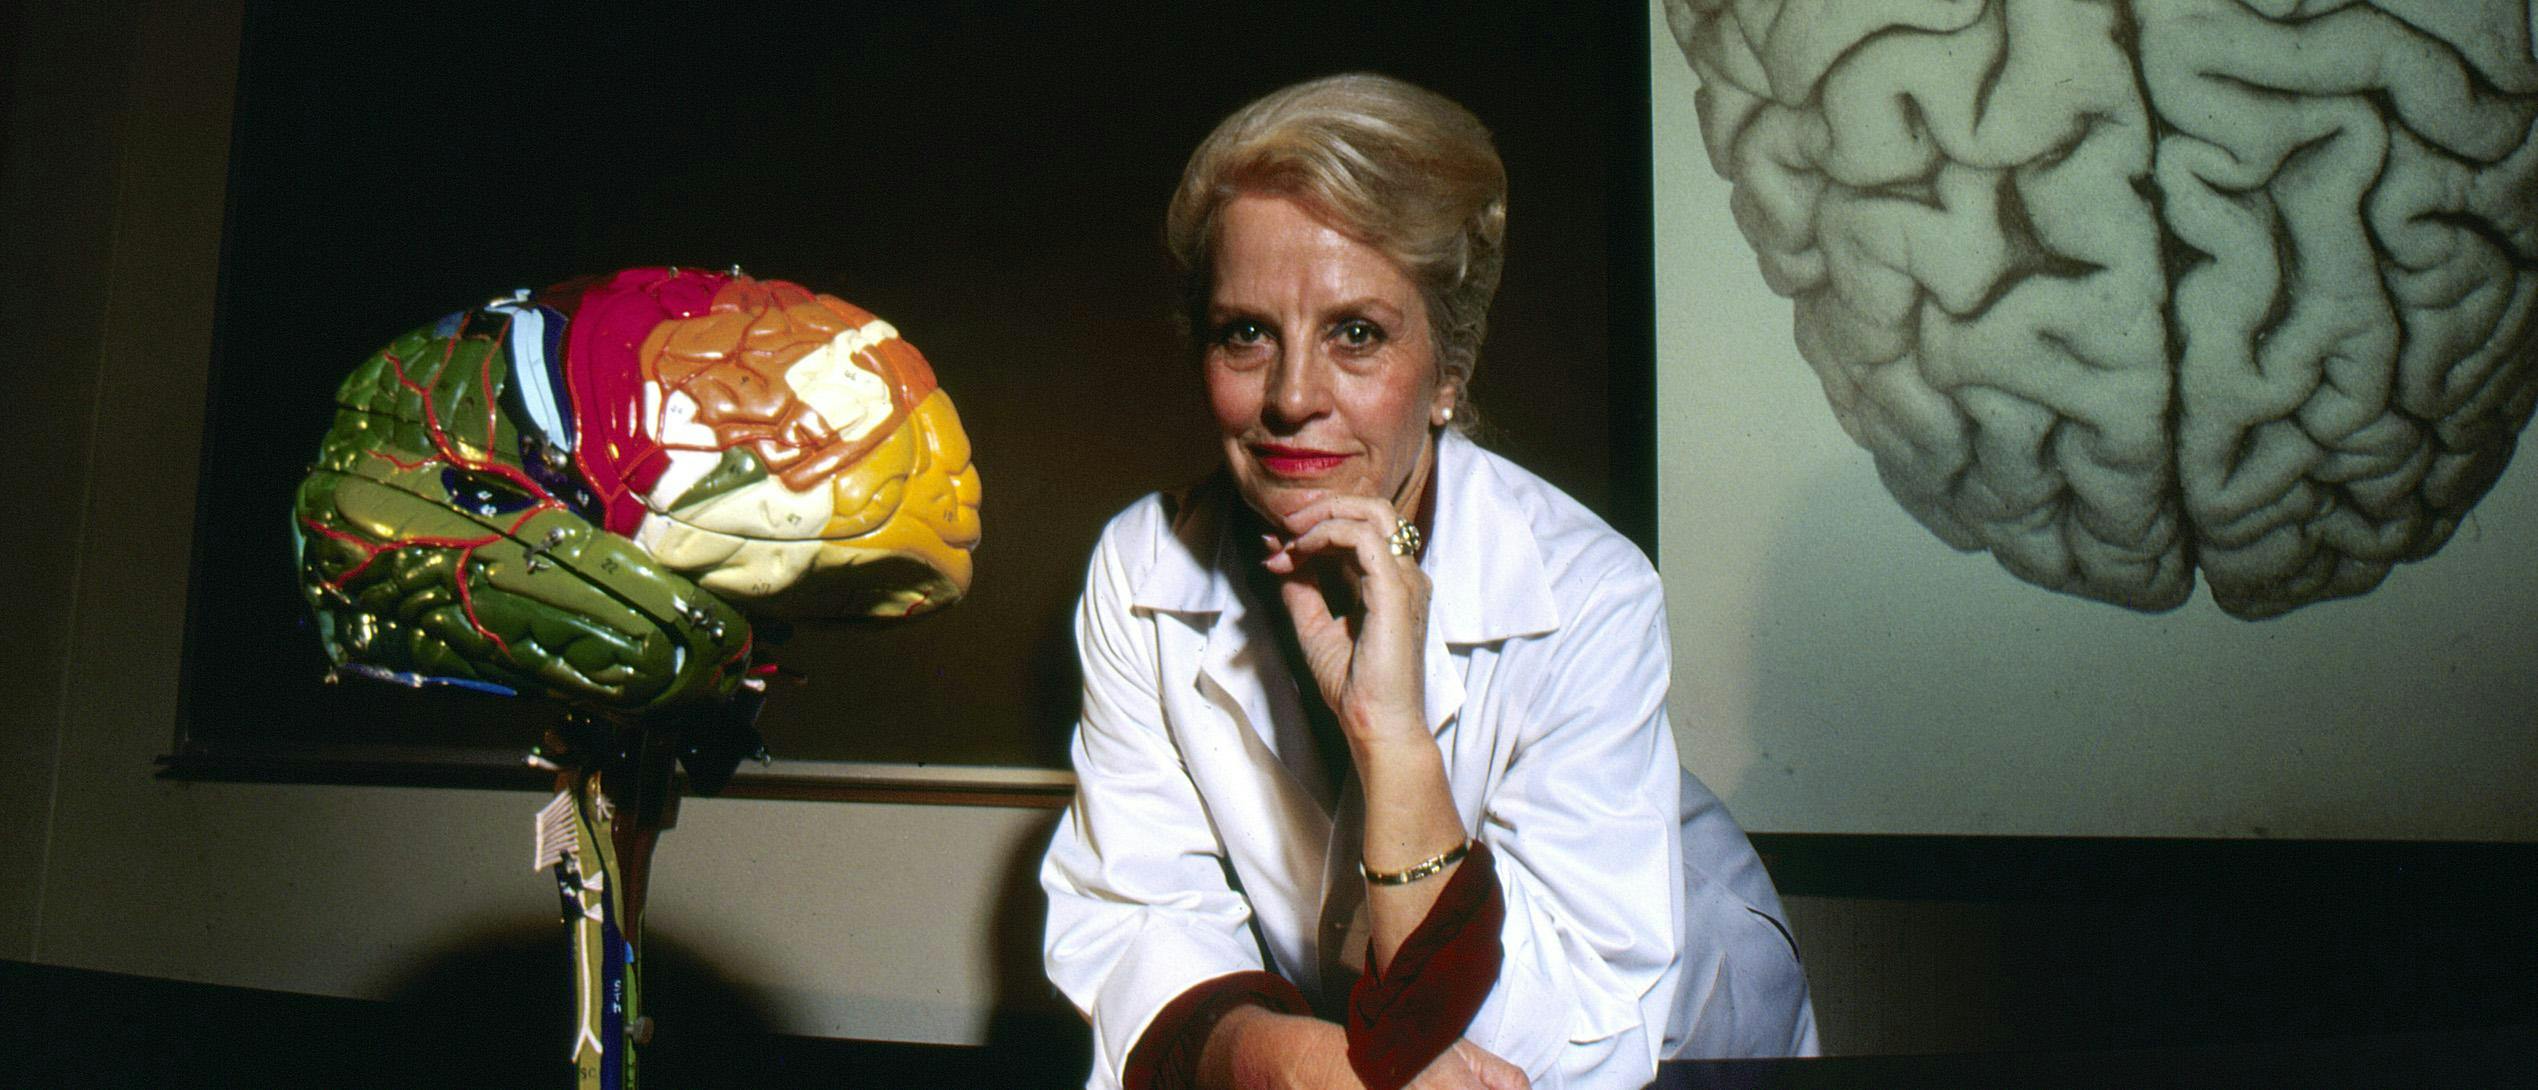 MY LOVE AFFAIR WITH THE BRAIN: The Life and Science of Dr. Marian Diamond